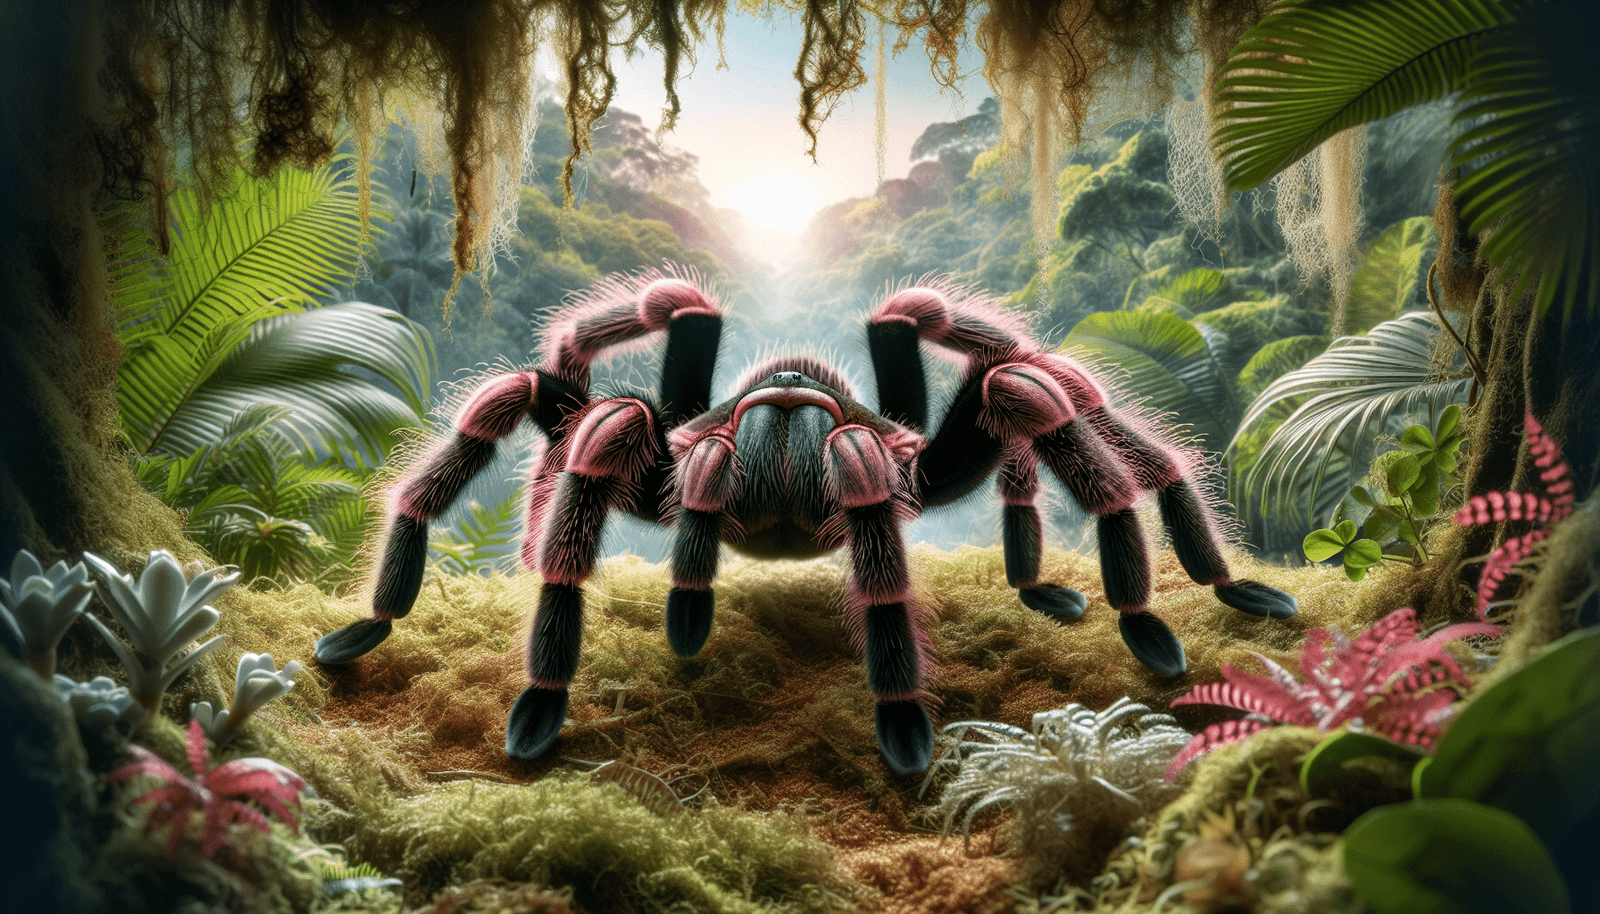 What Is The Natural Range Of The Strikingly Marked Brazilian Salmon Pink Tarantula?